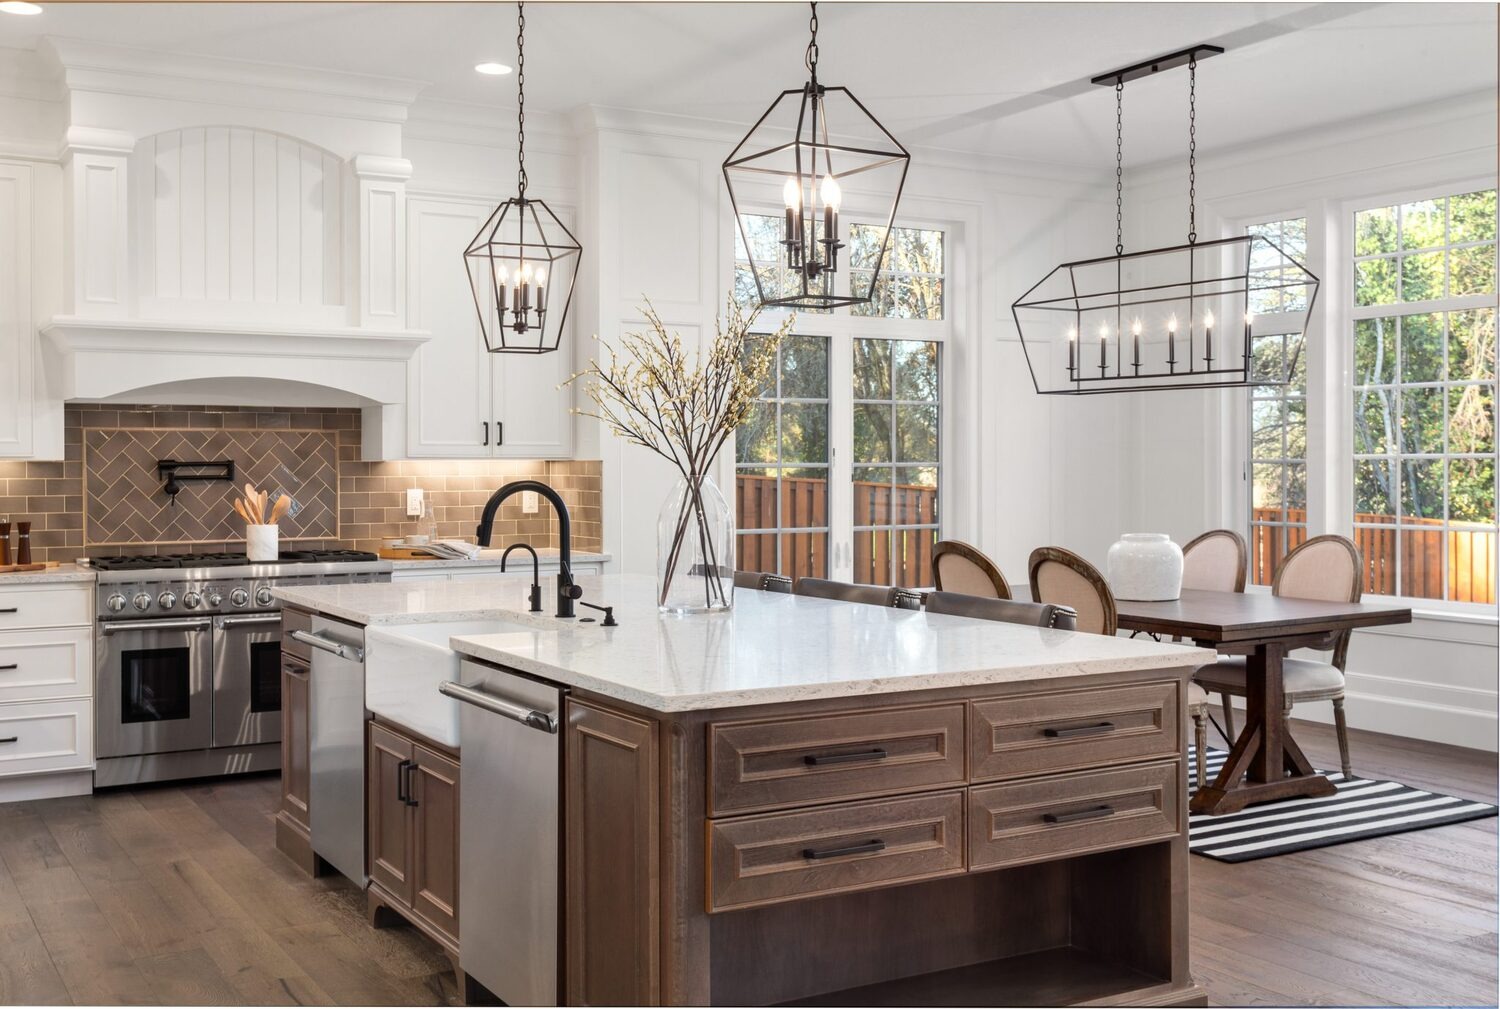 The kitchen remodeling Wilmette project created a stunning traditional kitchen with white and brown wooden features